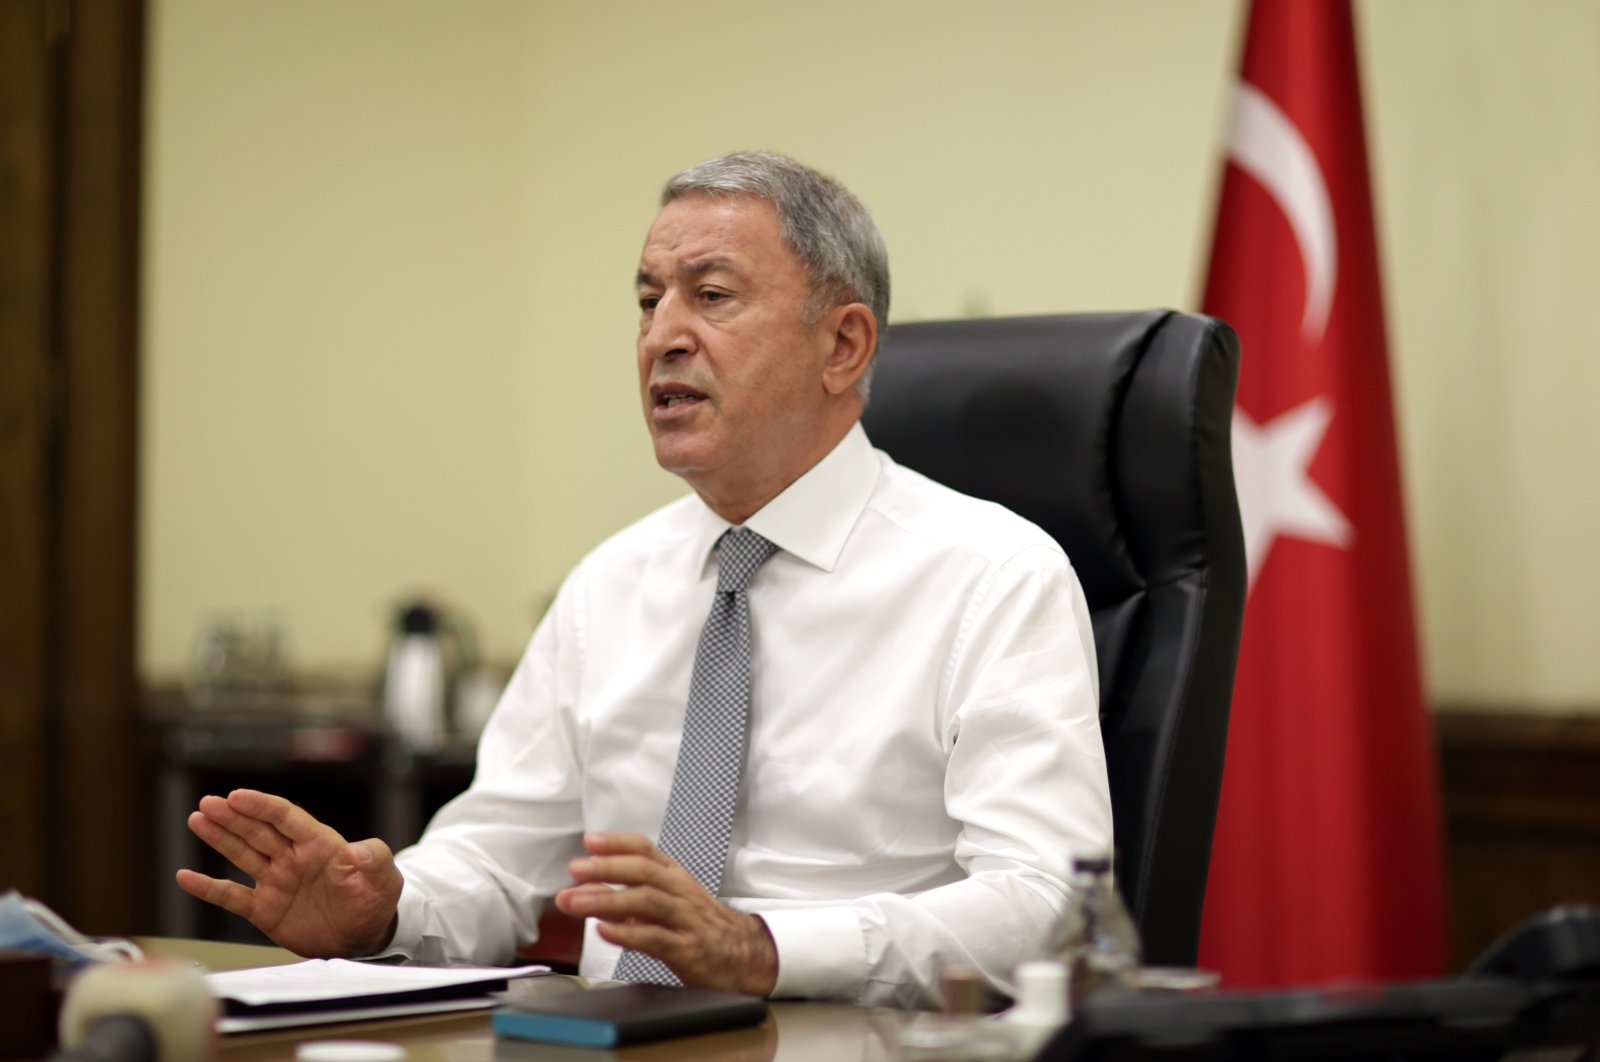 Defense Minister Hulusi Akar is seen during a teleconference in the capital Ankara, Turkey, July 5, 2021. DHA Photo)